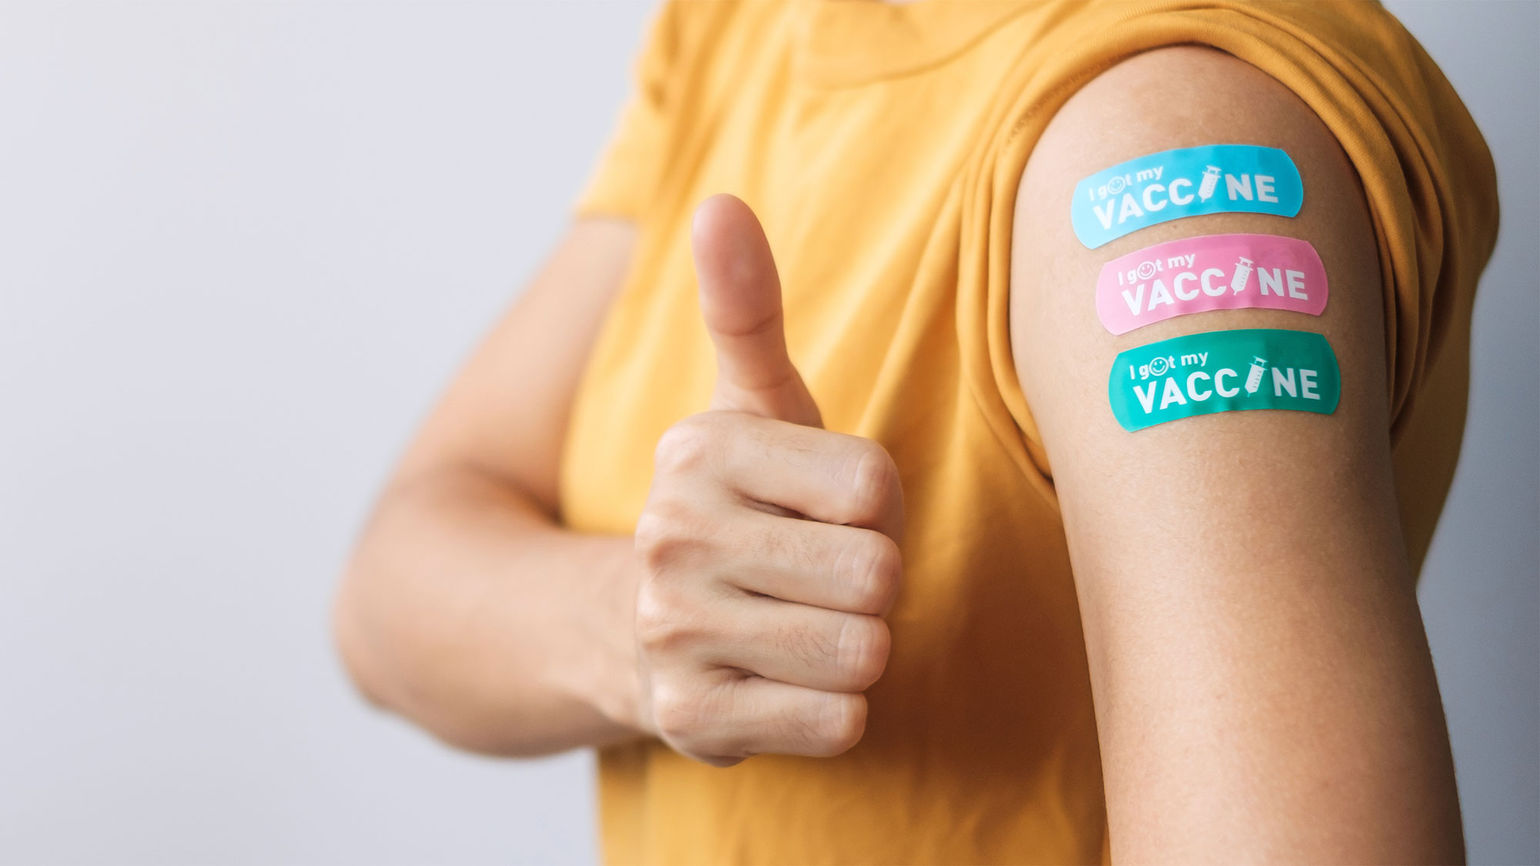 CDC relaxes 'highly vaccinated' cruise threshold: Travel Weekly